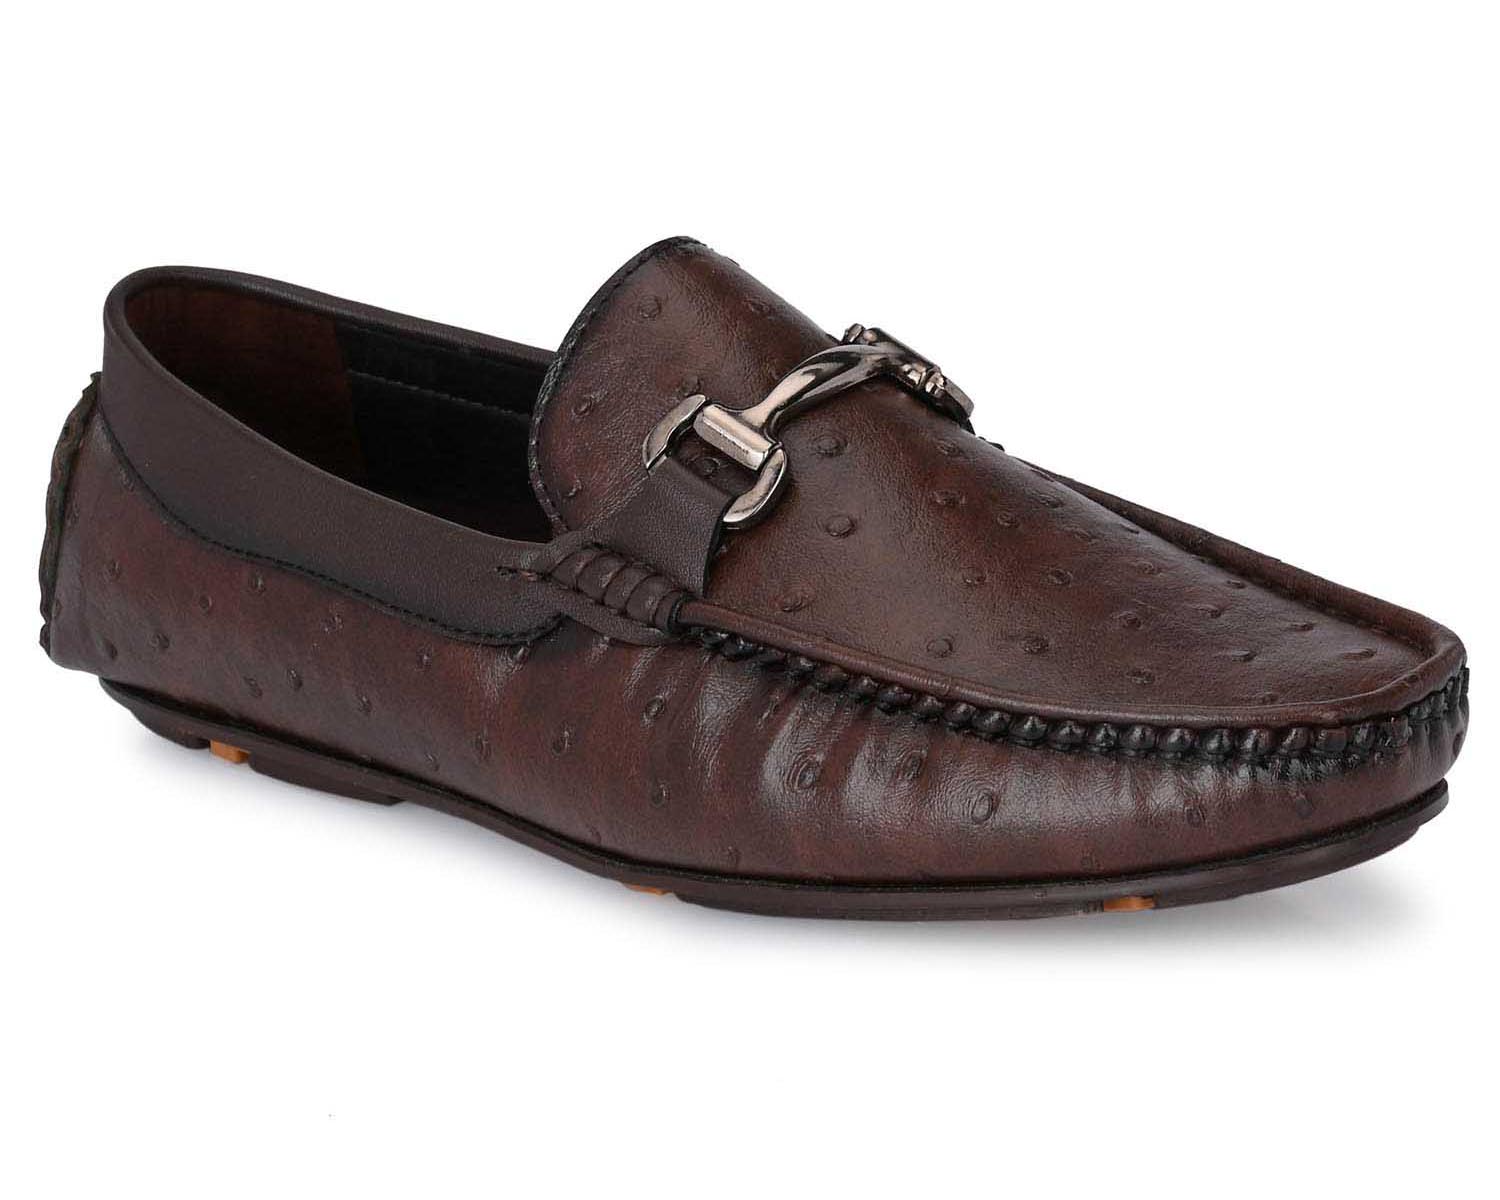 Pair-it Men's Loafers Shoes -KF-Loafer 116- Brown